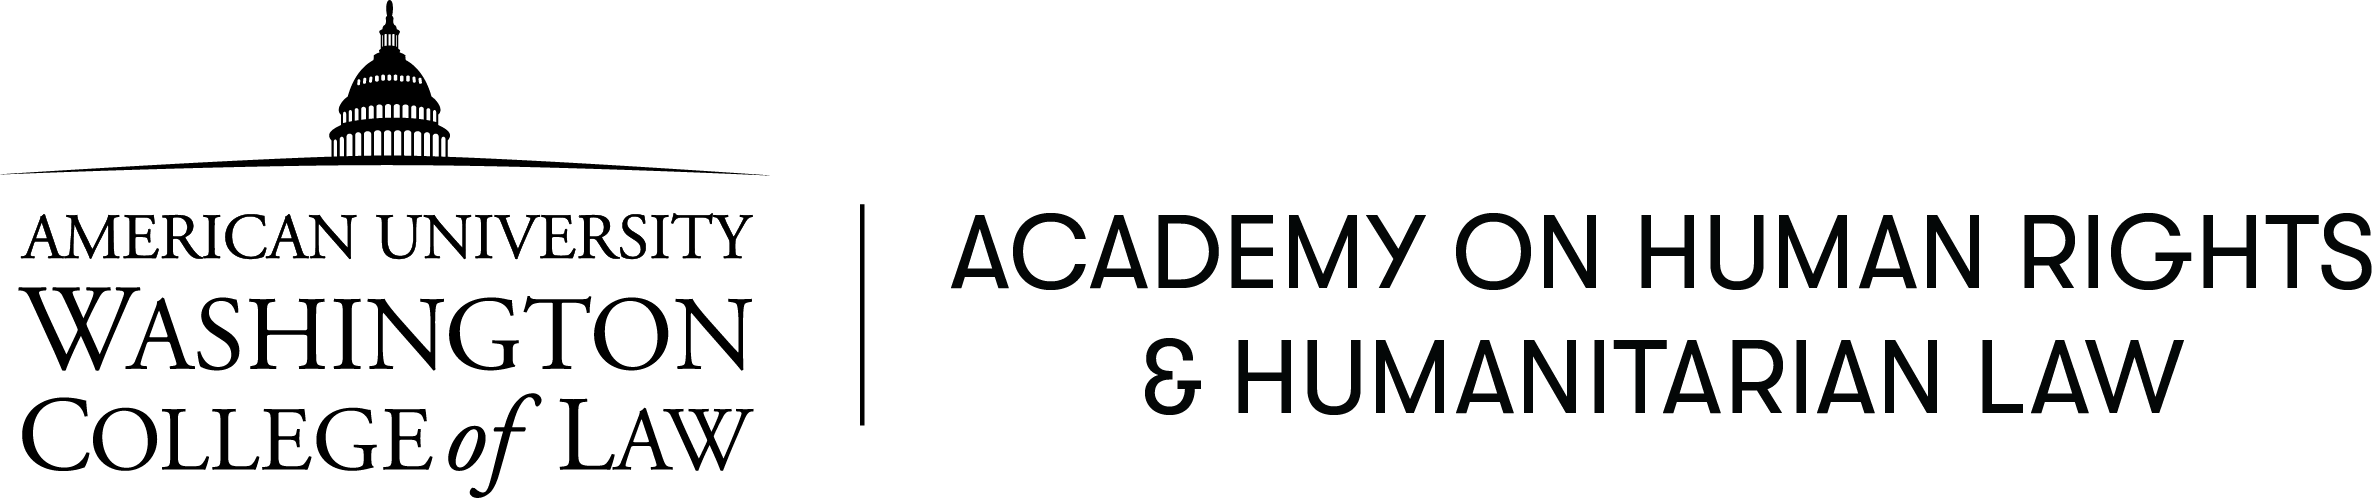 Academy On Human Rights & Humanitarian Law Logo (landscape)